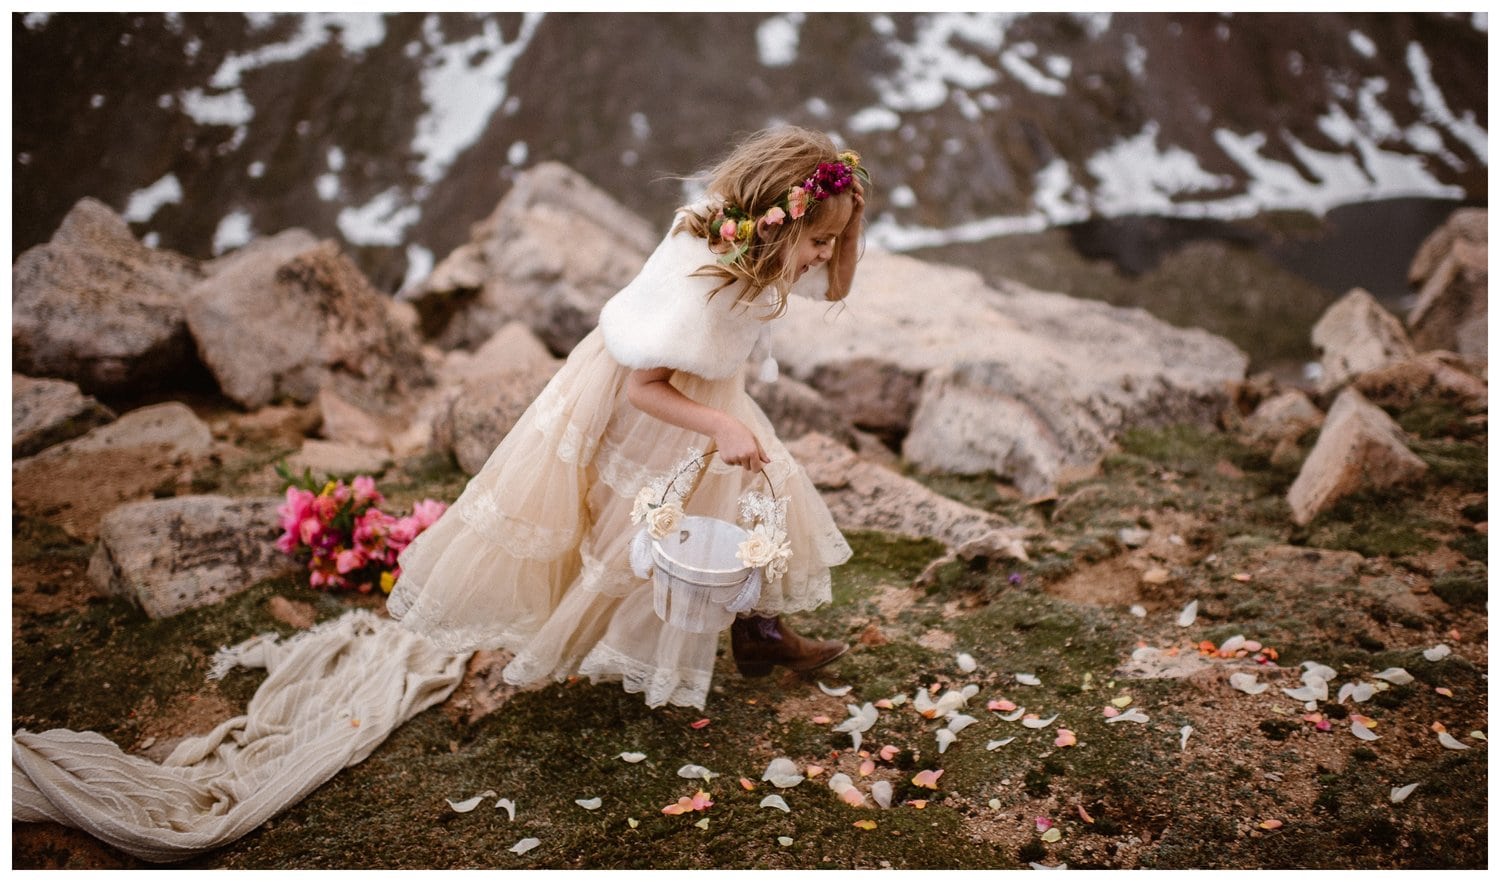 Young girl wearing a white dress, fur shawl, flower crown, and carrying a basket. There are flower petals creating a path in front of her, and snow-capped mountains in the background.